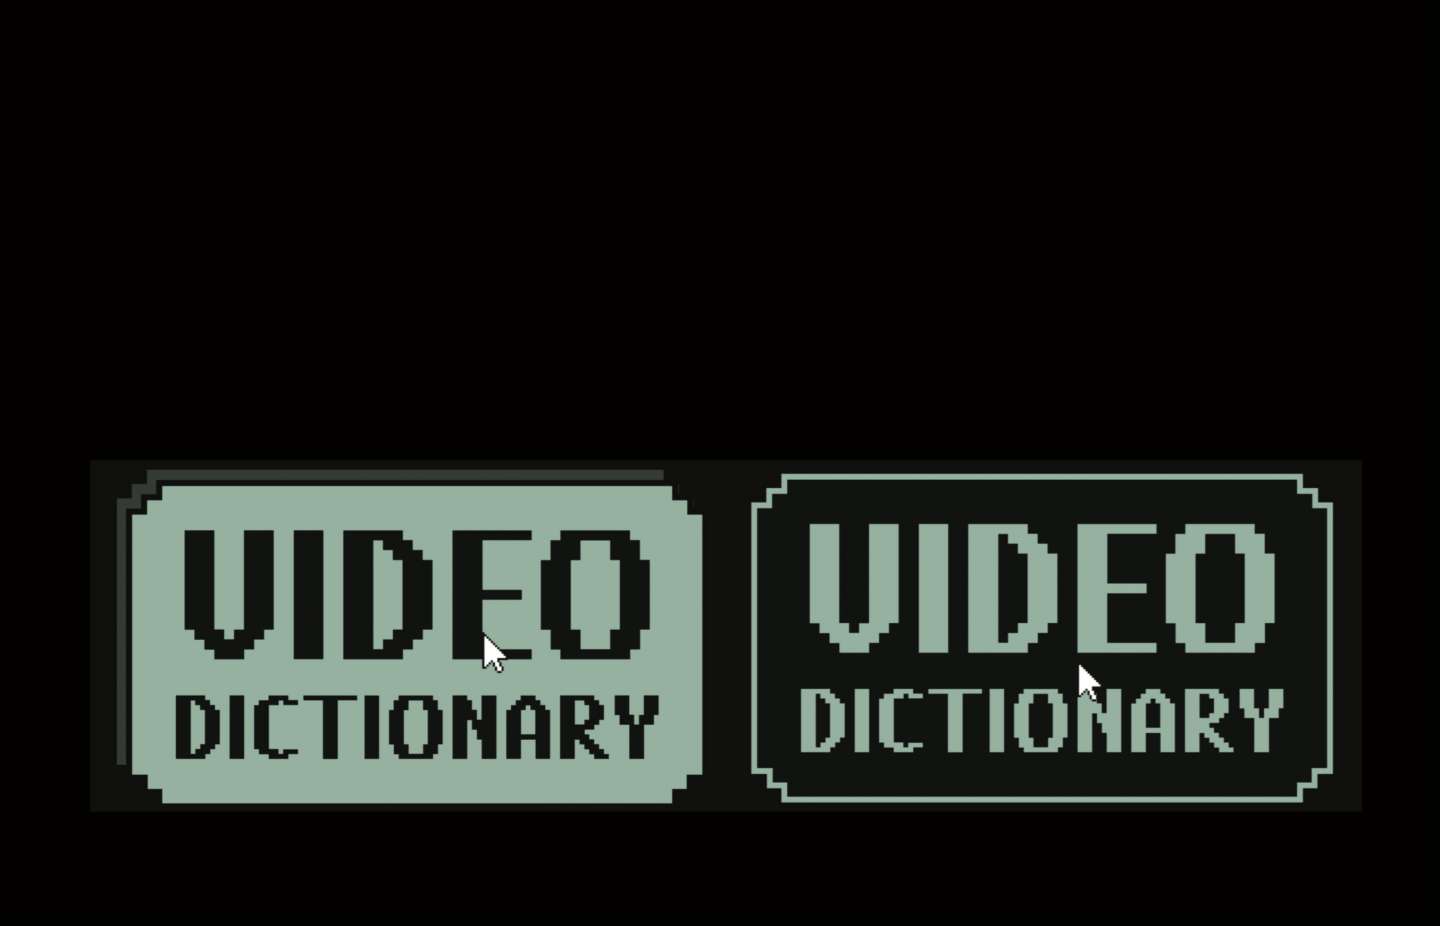 VIDEO DICTIONARY